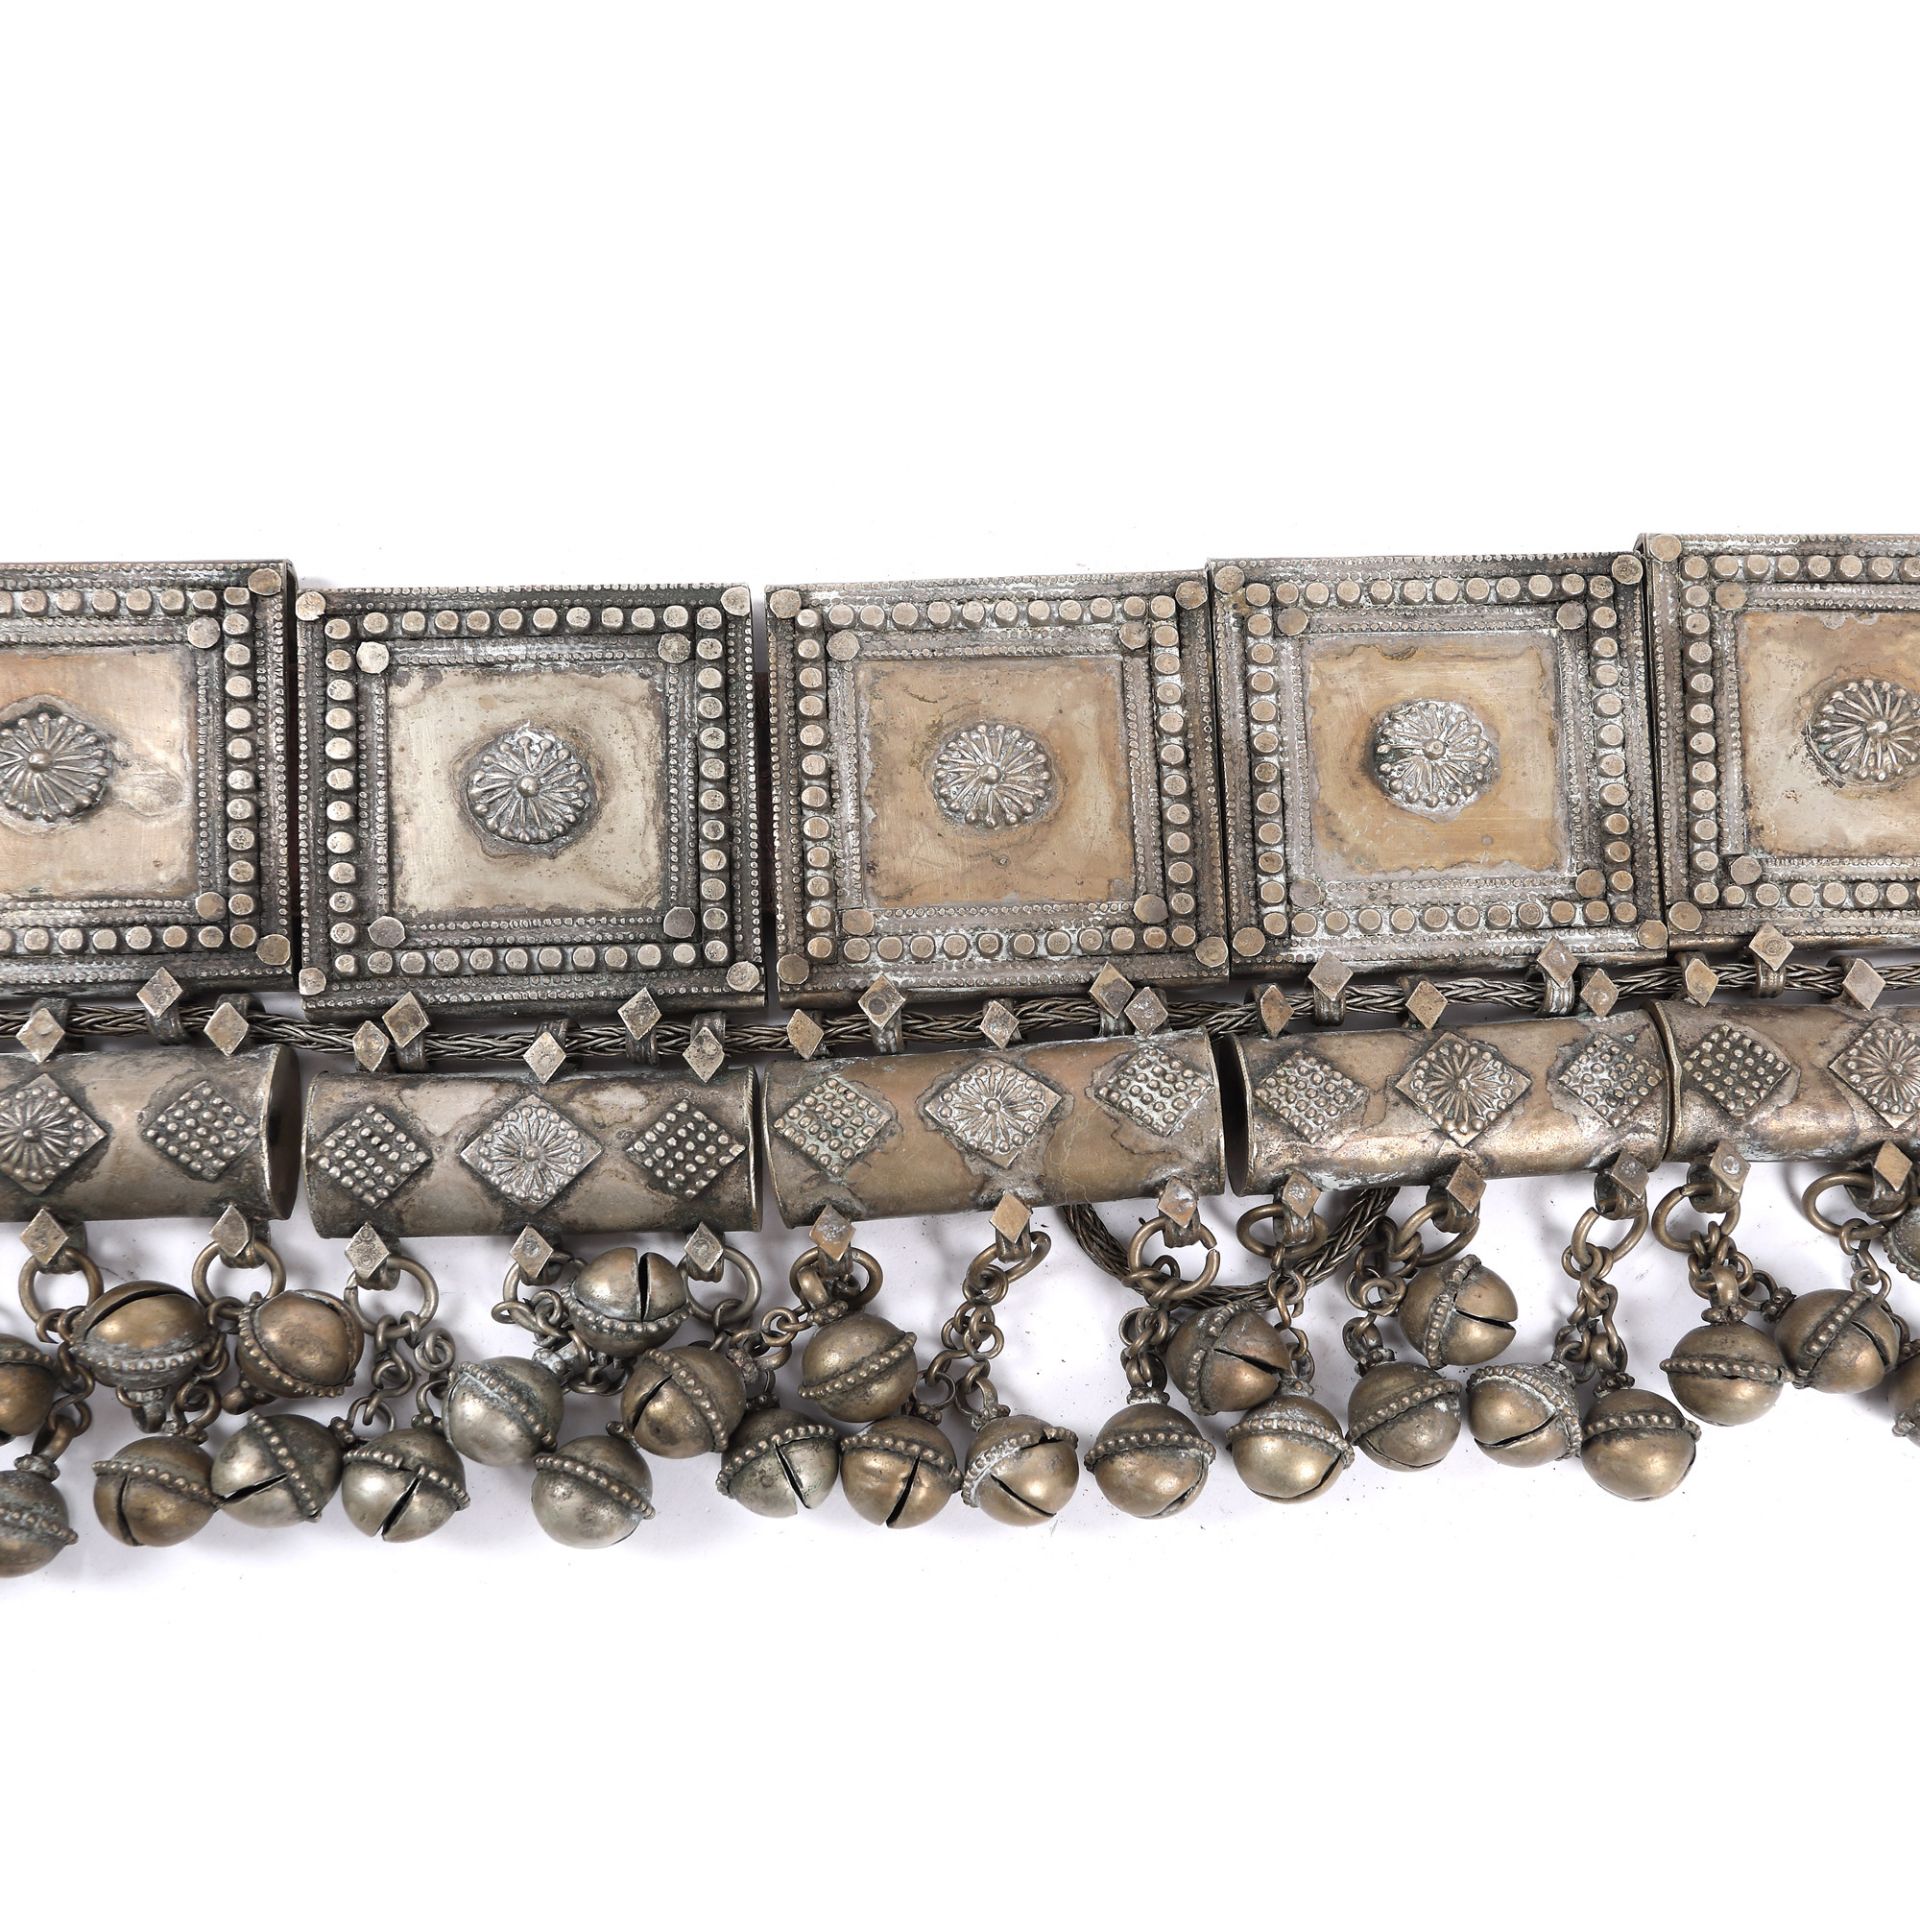 Indo-Persian belt, with oriental motifs, start of the 20th century - Image 2 of 3